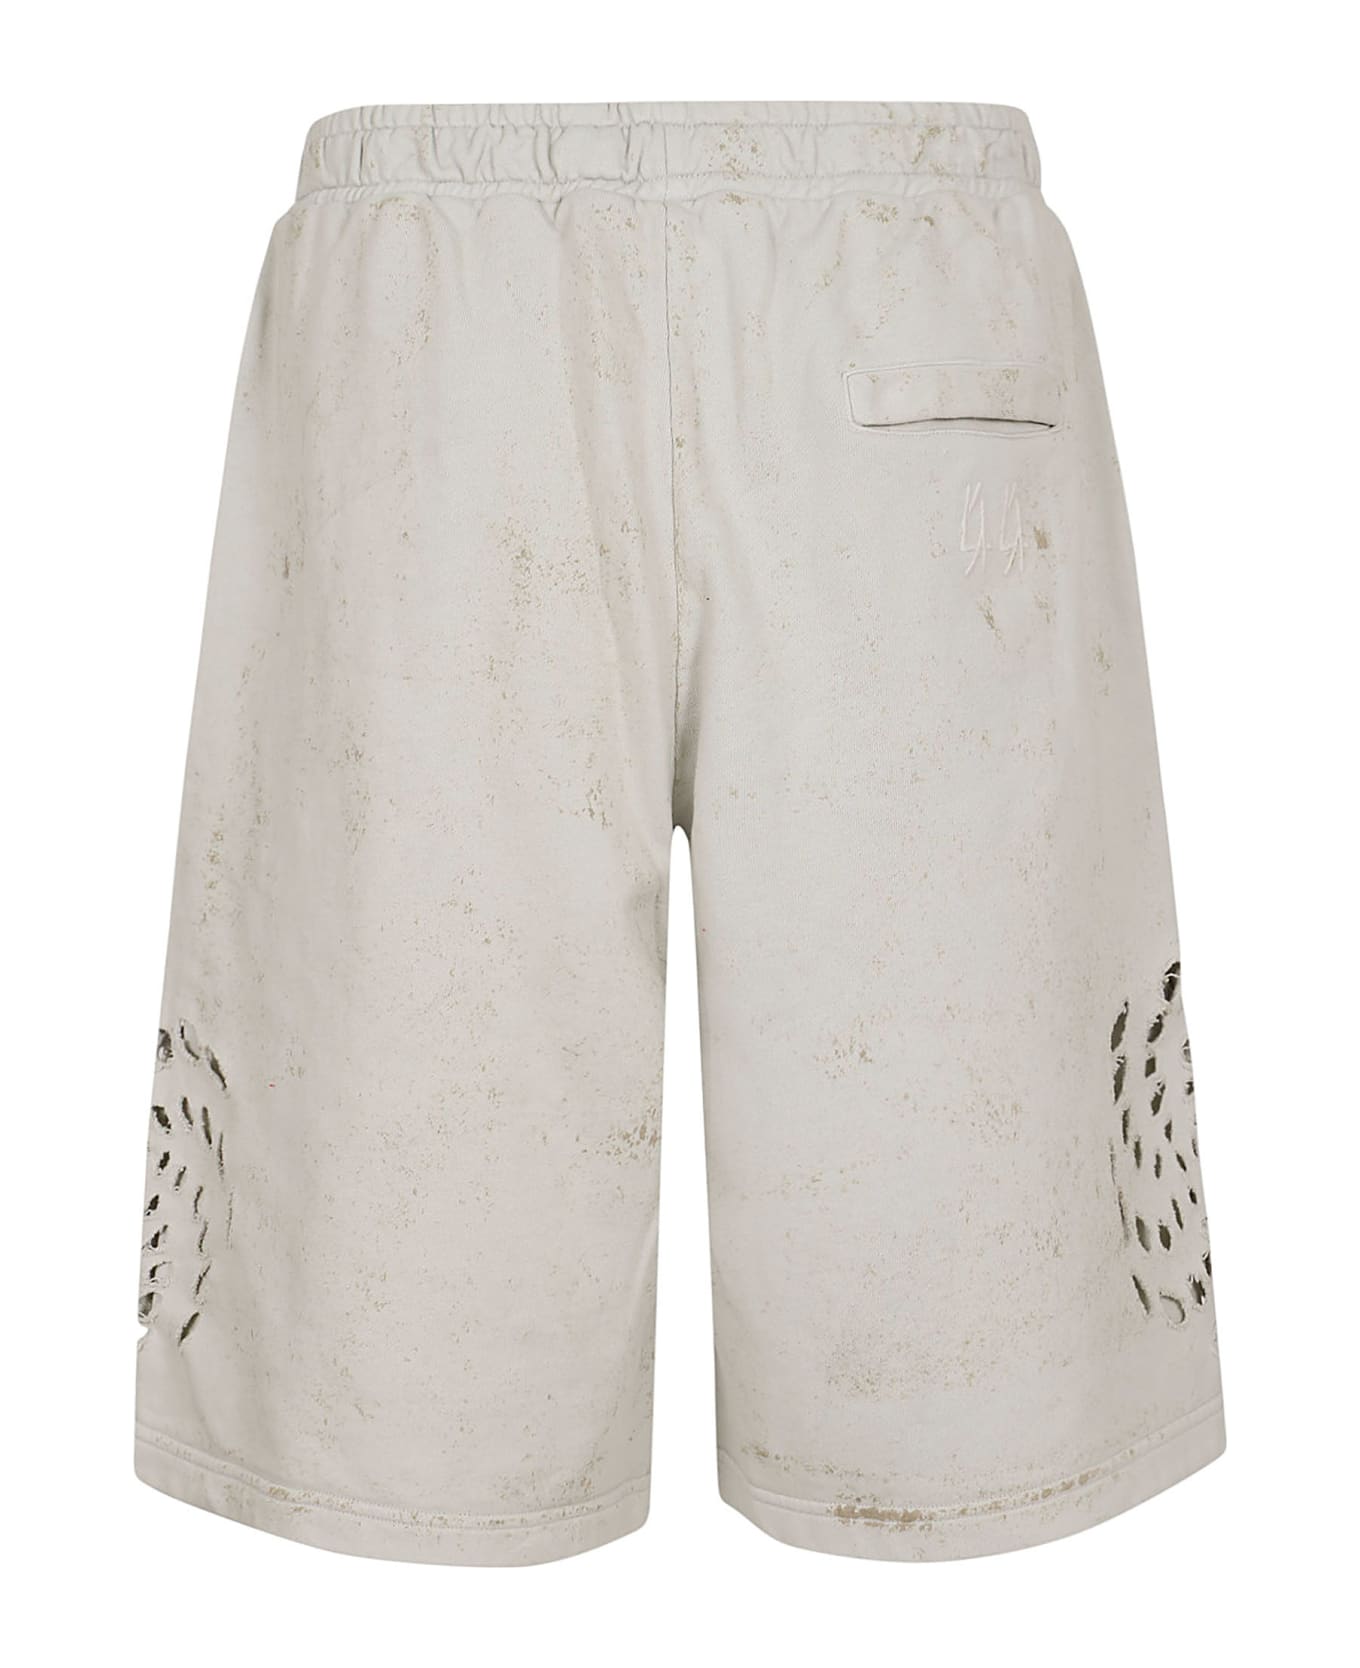 44 Label Group Trip Short Jersey - Dirty White Gyps